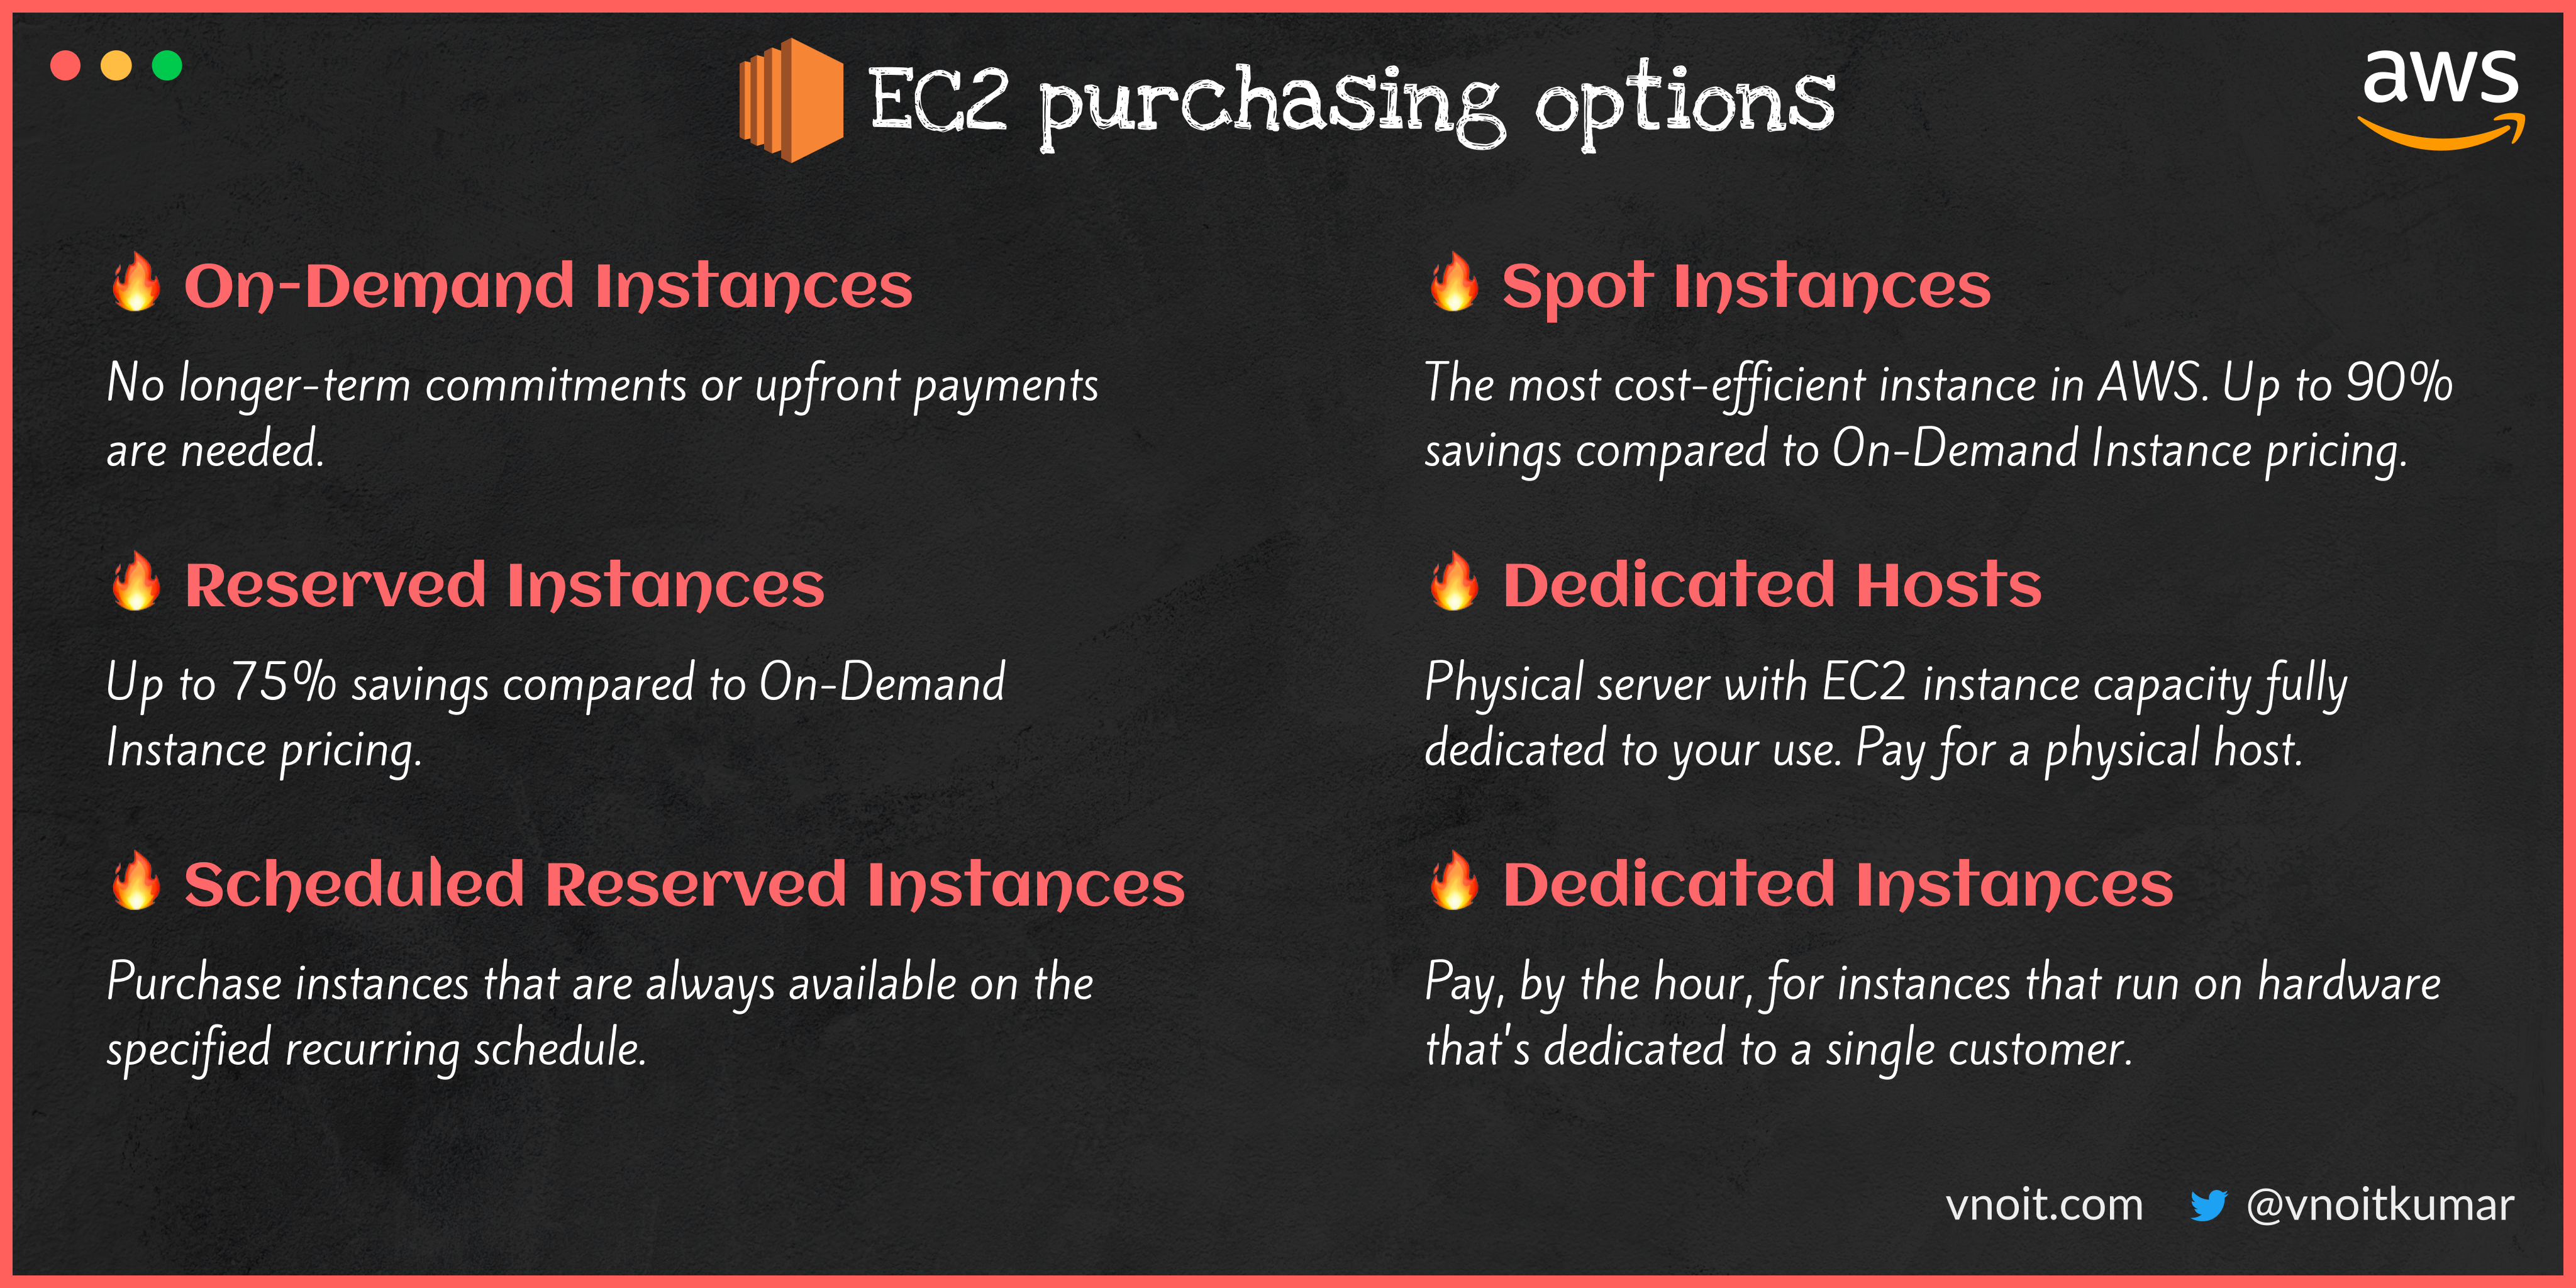 IAWS EC2 Instance purchasing options